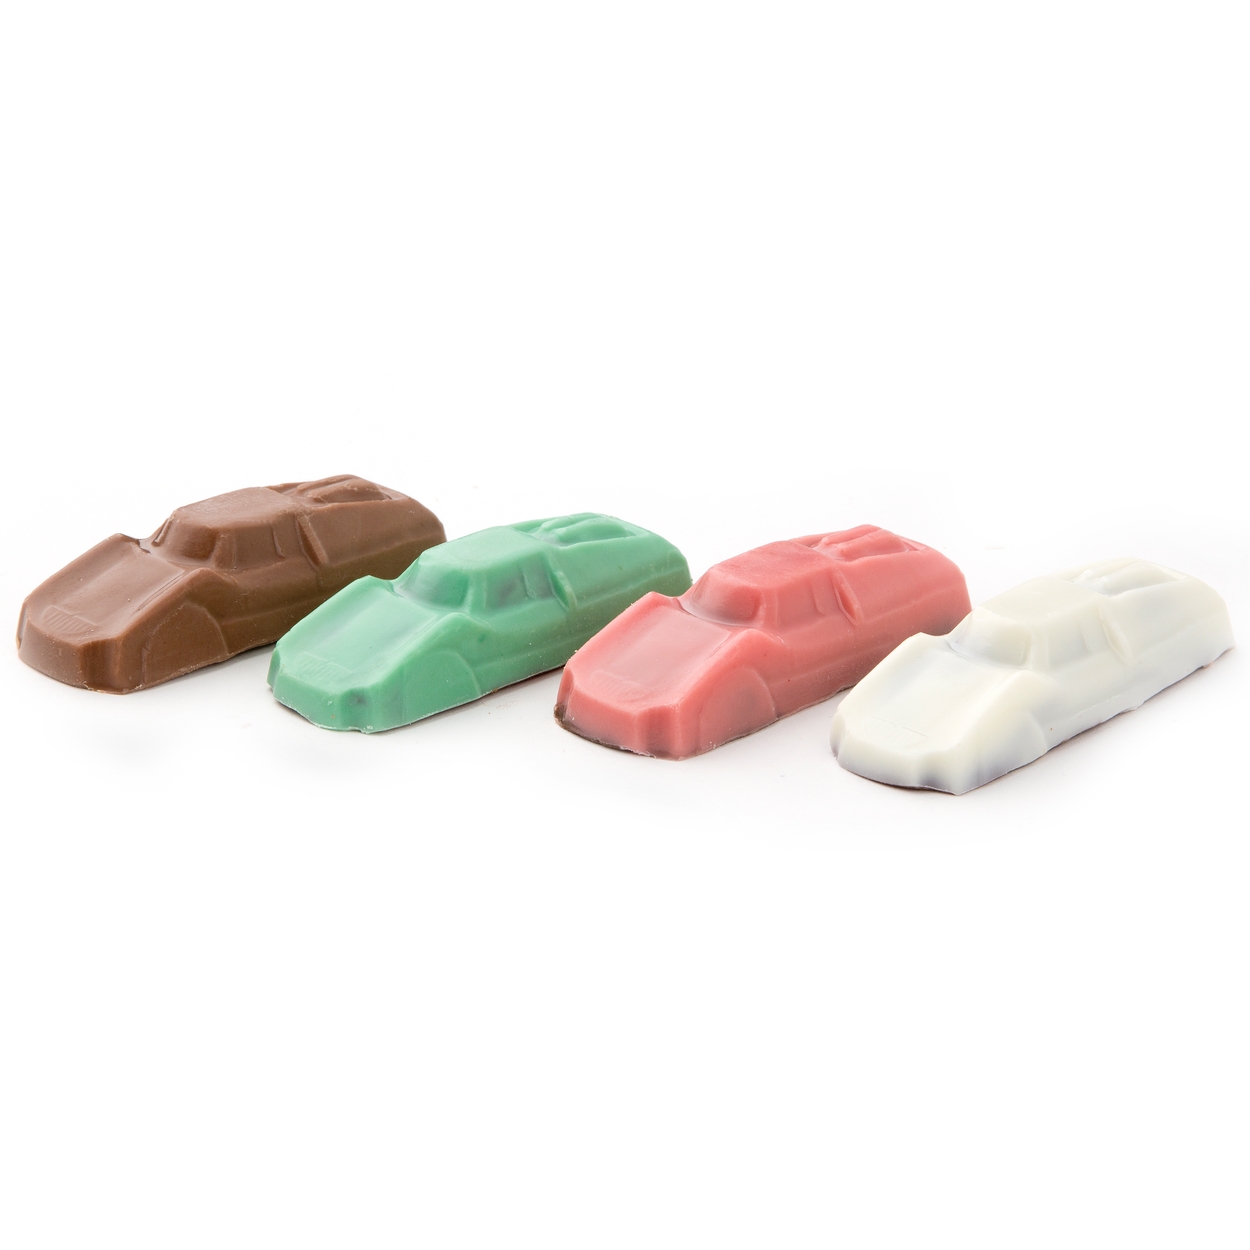 Buy Chocolate Mini Cars in Bulk at Wholesale Prices Online Candy